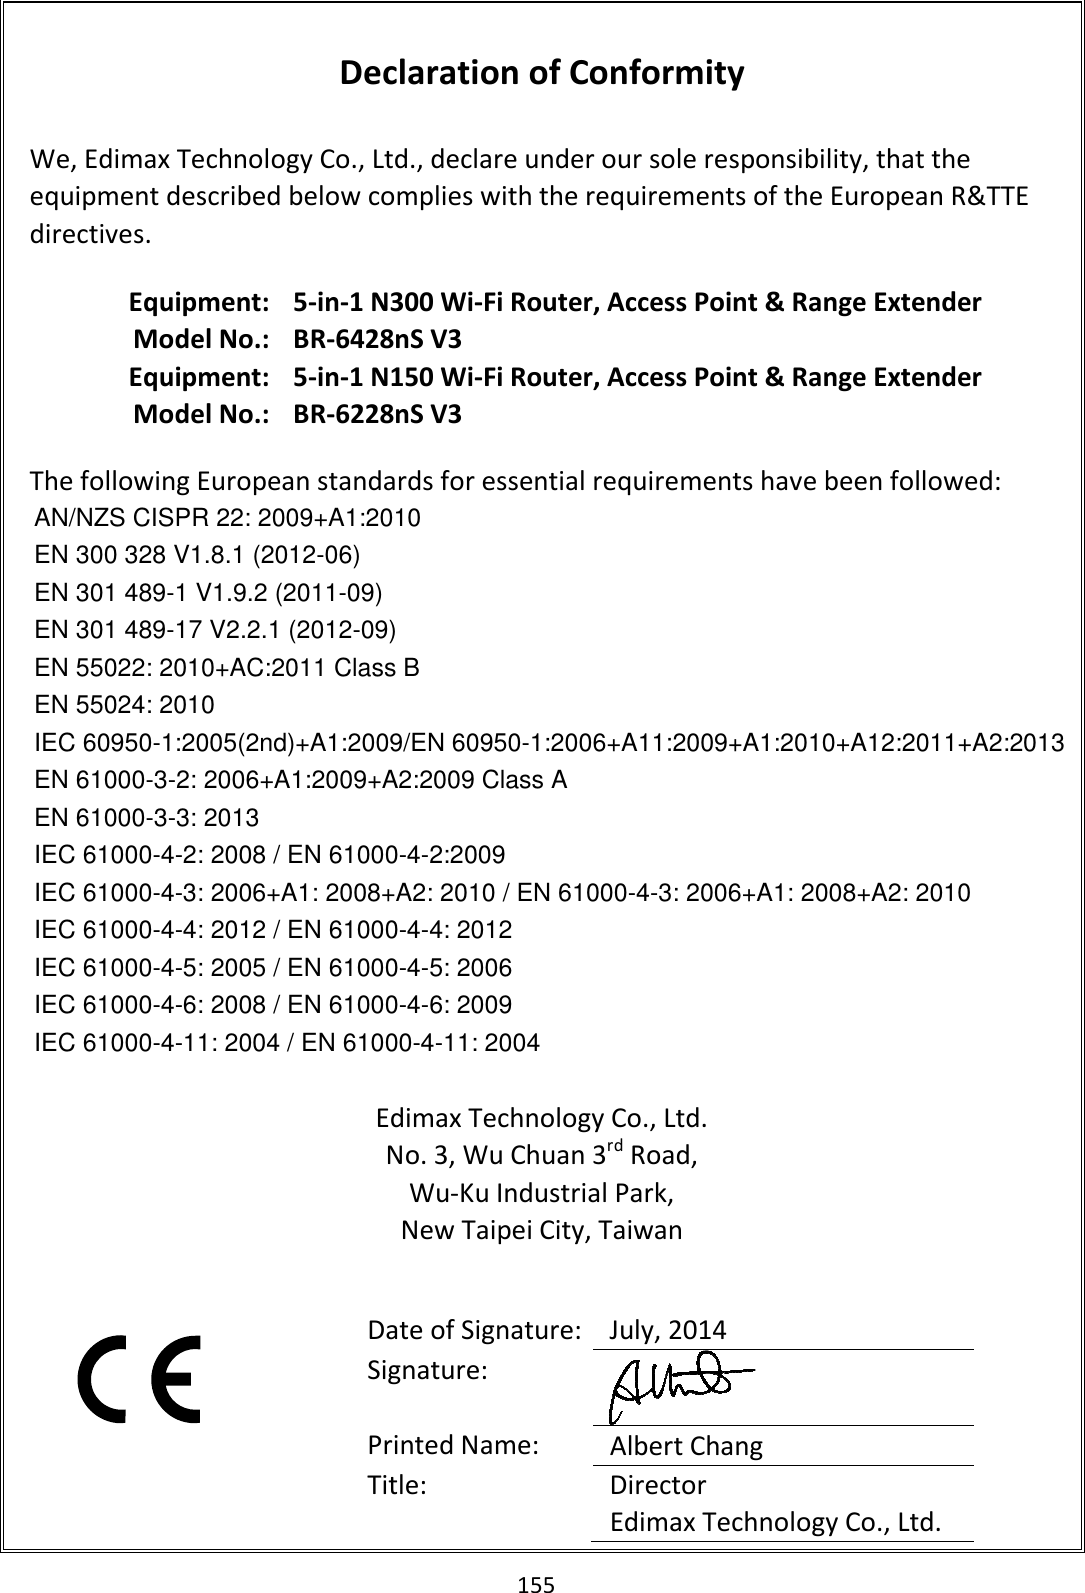 155  Declaration of Conformity  We, Edimax Technology Co., Ltd., declare under our sole responsibility, that the equipment described below complies with the requirements of the European R&amp;TTE directives.  Equipment: 5-in-1 N300 Wi-Fi Router, Access Point &amp; Range Extender Model No.: BR-6428nS V3   Equipment: 5-in-1 N150 Wi-Fi Router, Access Point &amp; Range Extender Model No.: BR-6228nS V3  The following European standards for essential requirements have been followed: AN/NZS CISPR 22: 2009+A1:2010 EN 300 328 V1.8.1 (2012-06) EN 301 489-1 V1.9.2 (2011-09) EN 301 489-17 V2.2.1 (2012-09) EN 55022: 2010+AC:2011 Class B EN 55024: 2010 IEC 60950-1:2005(2nd)+A1:2009/EN 60950-1:2006+A11:2009+A1:2010+A12:2011+A2:2013 EN 61000-3-2: 2006+A1:2009+A2:2009 Class A EN 61000-3-3: 2013 IEC 61000-4-2: 2008 / EN 61000-4-2:2009 IEC 61000-4-3: 2006+A1: 2008+A2: 2010 / EN 61000-4-3: 2006+A1: 2008+A2: 2010 IEC 61000-4-4: 2012 / EN 61000-4-4: 2012 IEC 61000-4-5: 2005 / EN 61000-4-5: 2006 IEC 61000-4-6: 2008 / EN 61000-4-6: 2009 IEC 61000-4-11: 2004 / EN 61000-4-11: 2004  Edimax Technology Co., Ltd. No. 3, Wu Chuan 3rd Road, Wu-Ku Industrial Park, New Taipei City, Taiwan      Date of Signature: July, 2014 Signature:  Printed Name:  Albert Chang Title:  Director Edimax Technology Co., Ltd.  